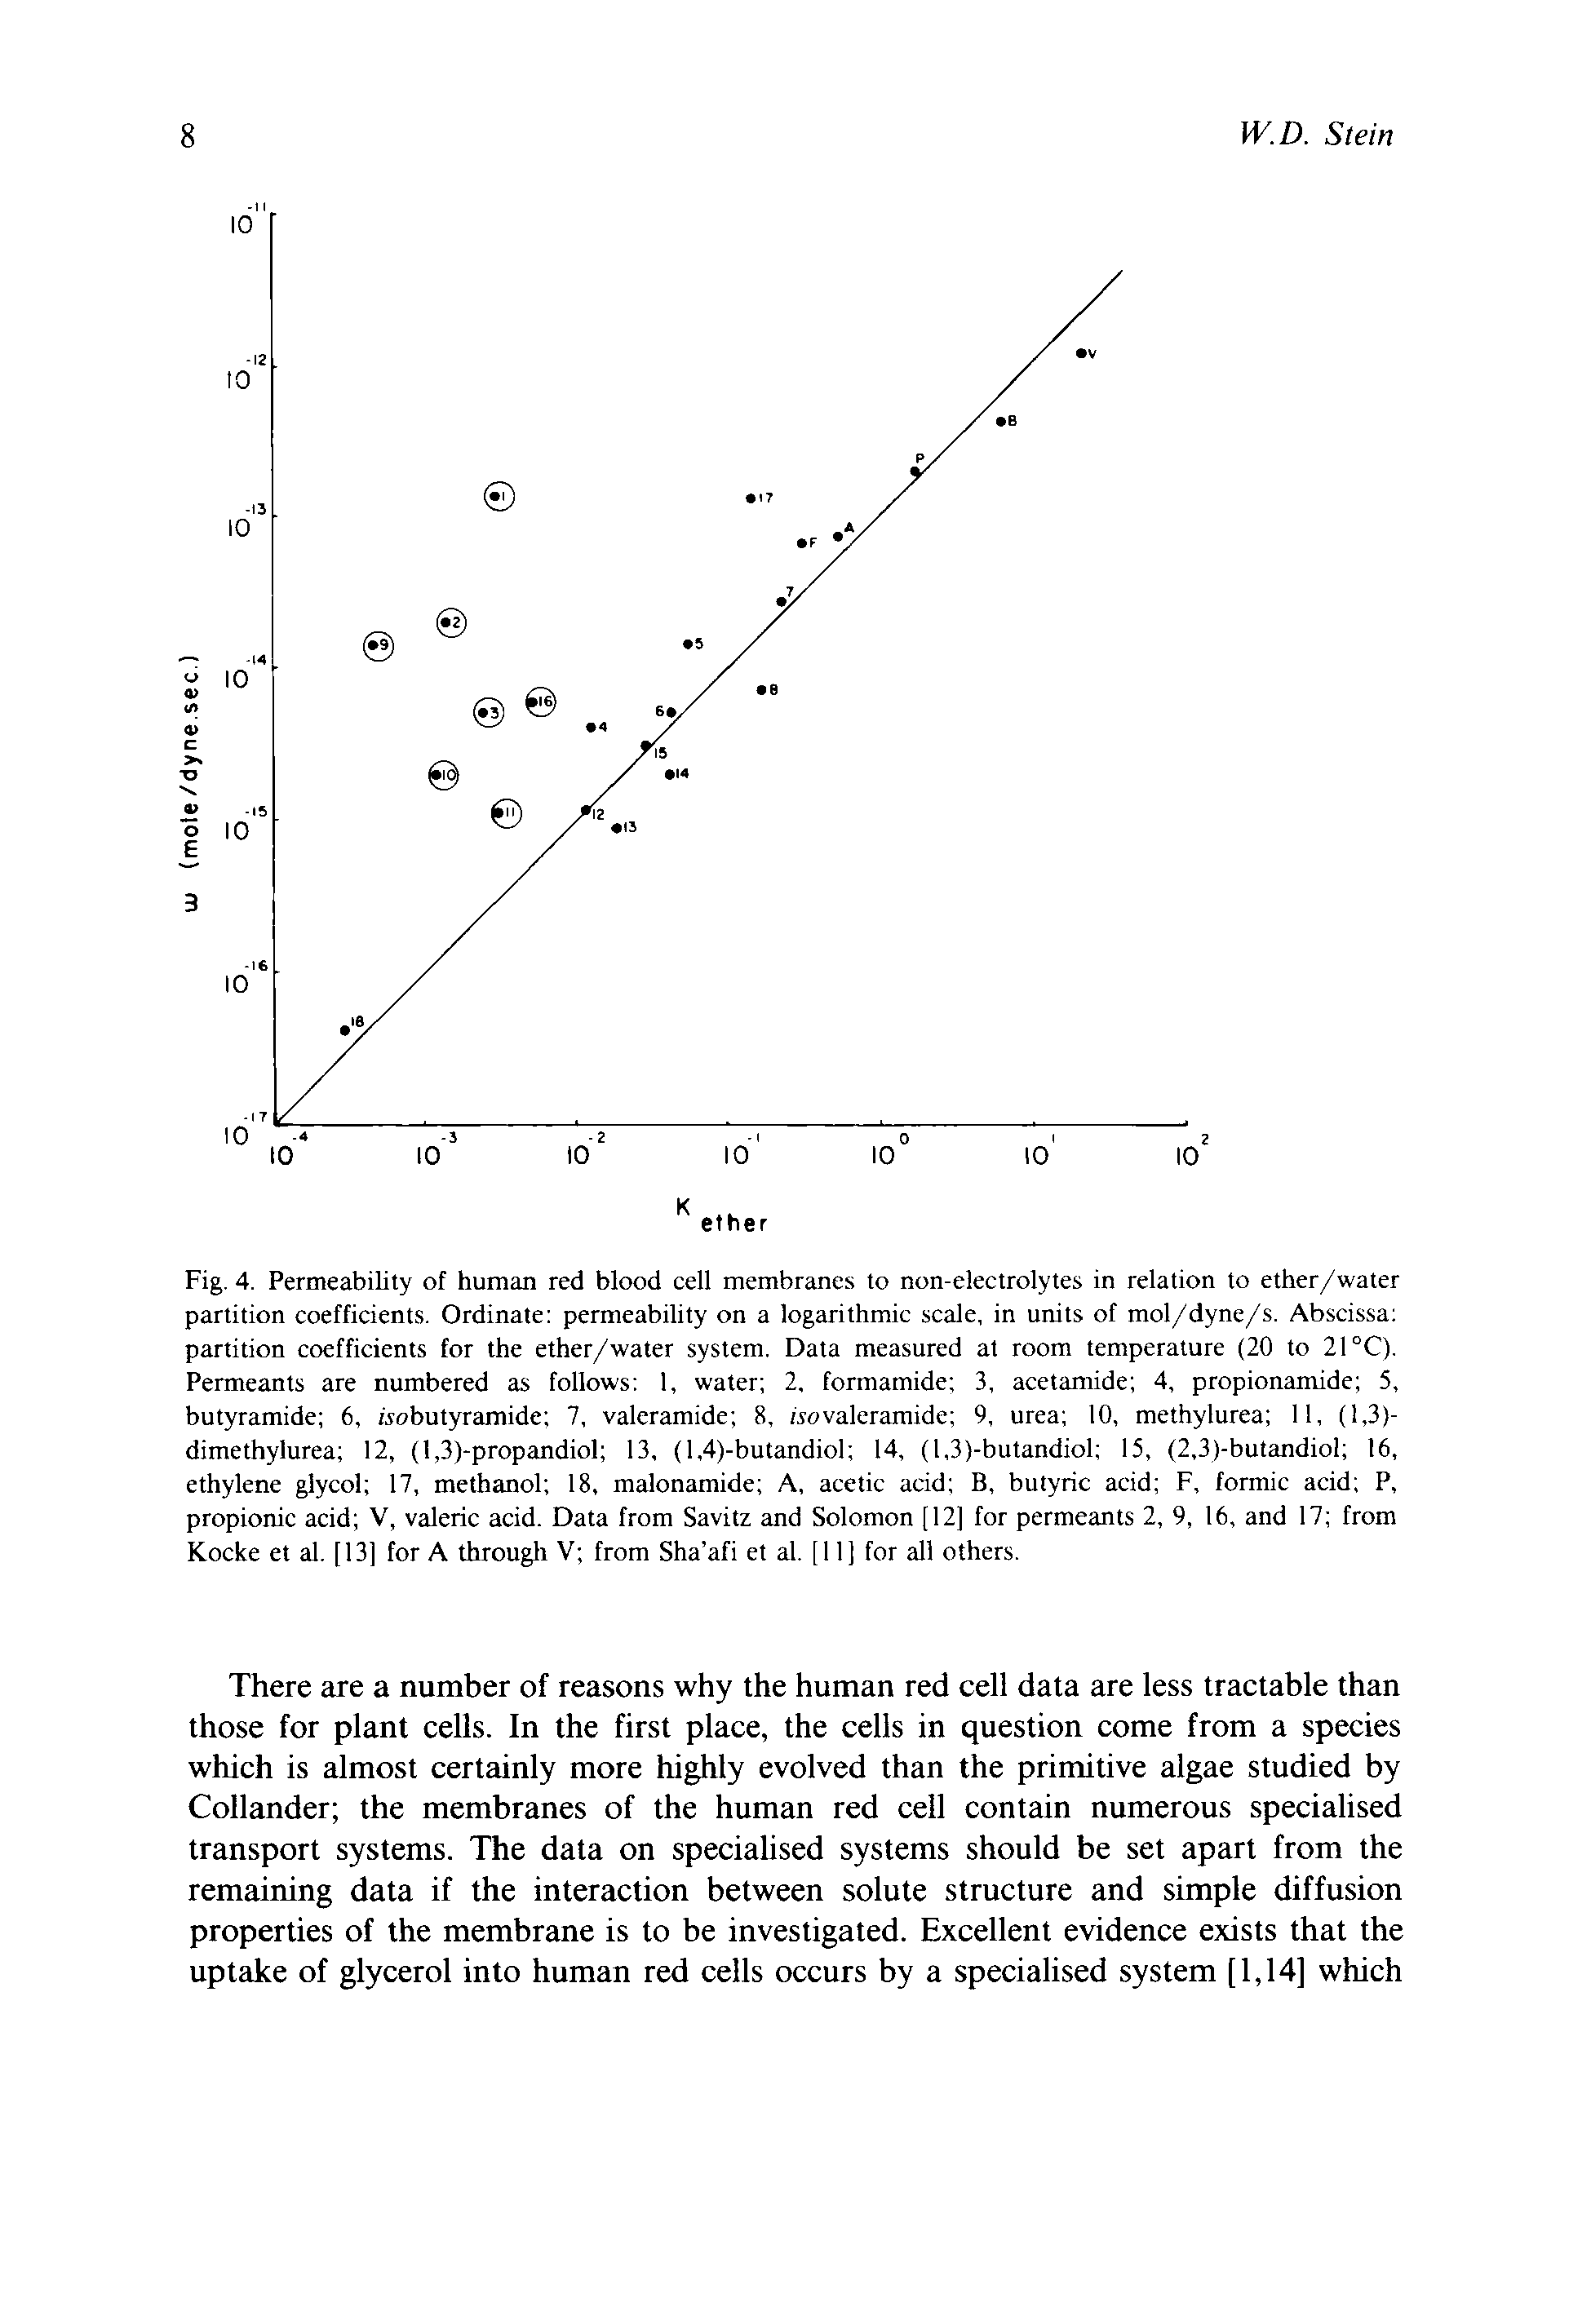 Fig. 4. Permeability of human red blood cell membranes to non-electrolytes in relation to ether/water partition coefficients. Ordinate permeability on a logarithmic scale, in units of mol/dyne/s. Abscissa partition coefficients tor the ether/water system. Data measured at room temperature (20 to 21 °C). Permeants are numbered as follows 1, water 2. formamide 3, acetamide 4, propionamide 5, butyramide 6, obutyramide 7, valcramide 8, /sovaleramide 9, urea 10, methylurea 11, (1,3)-dimethylurea 12, (l,3)-propandiol 13, (l,4)-butandiol 14, (l,3)-butandiol 15, (2,3)-butandiol 16, ethylene glycol 17, methanol 18, malonamide A, acetic acid B, butyric acid F, formic acid P, propionic acid V, valeric acid. Data from Savitz and Solomon [12] tor permeants 2, 9, 16, and 17 from Kocke et al. [13] for A througli V from Sha afi et al. [11] for all others.